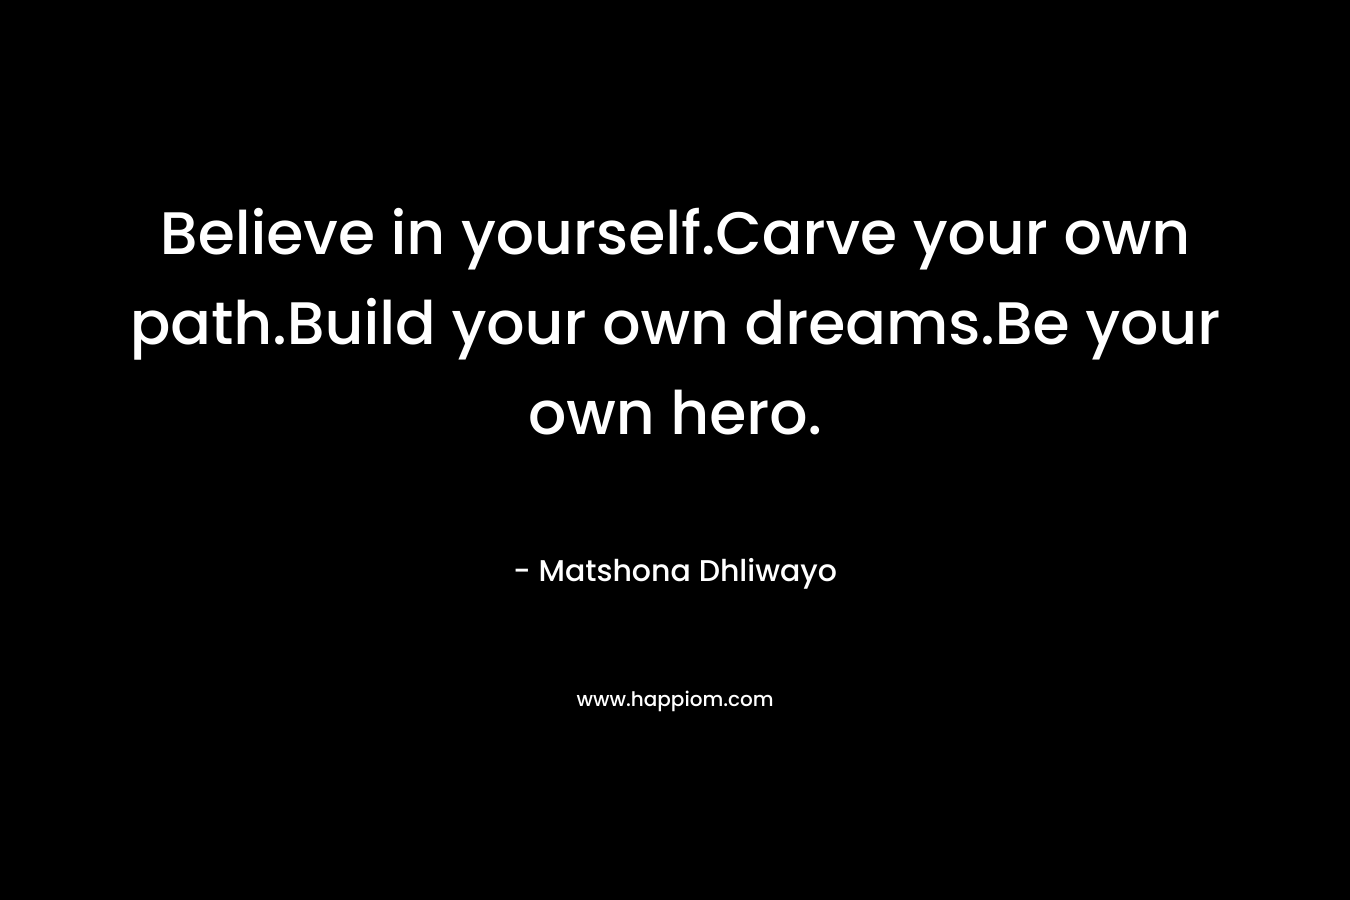 Believe in yourself.Carve your own path.Build your own dreams.Be your own hero.